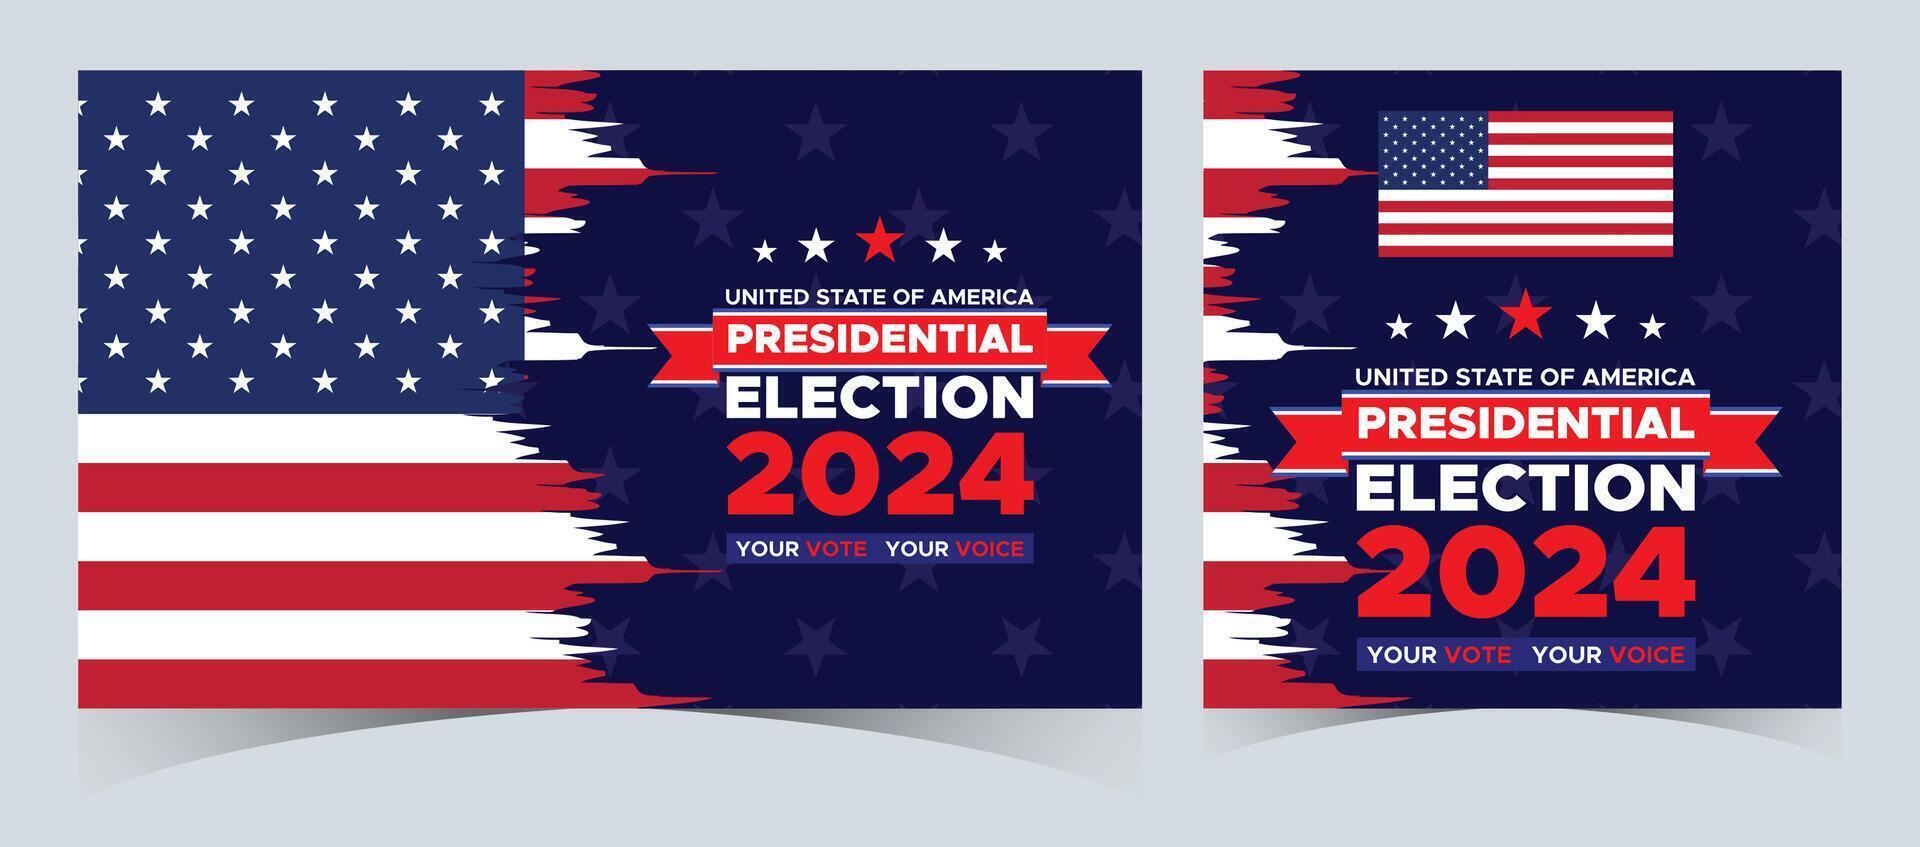 Set Of Vote 2024. Presidential election day in united states. Election 2024 USA. Political election campaign banner. background, post, Banner, card, poster design with Vote day November 5 US vector